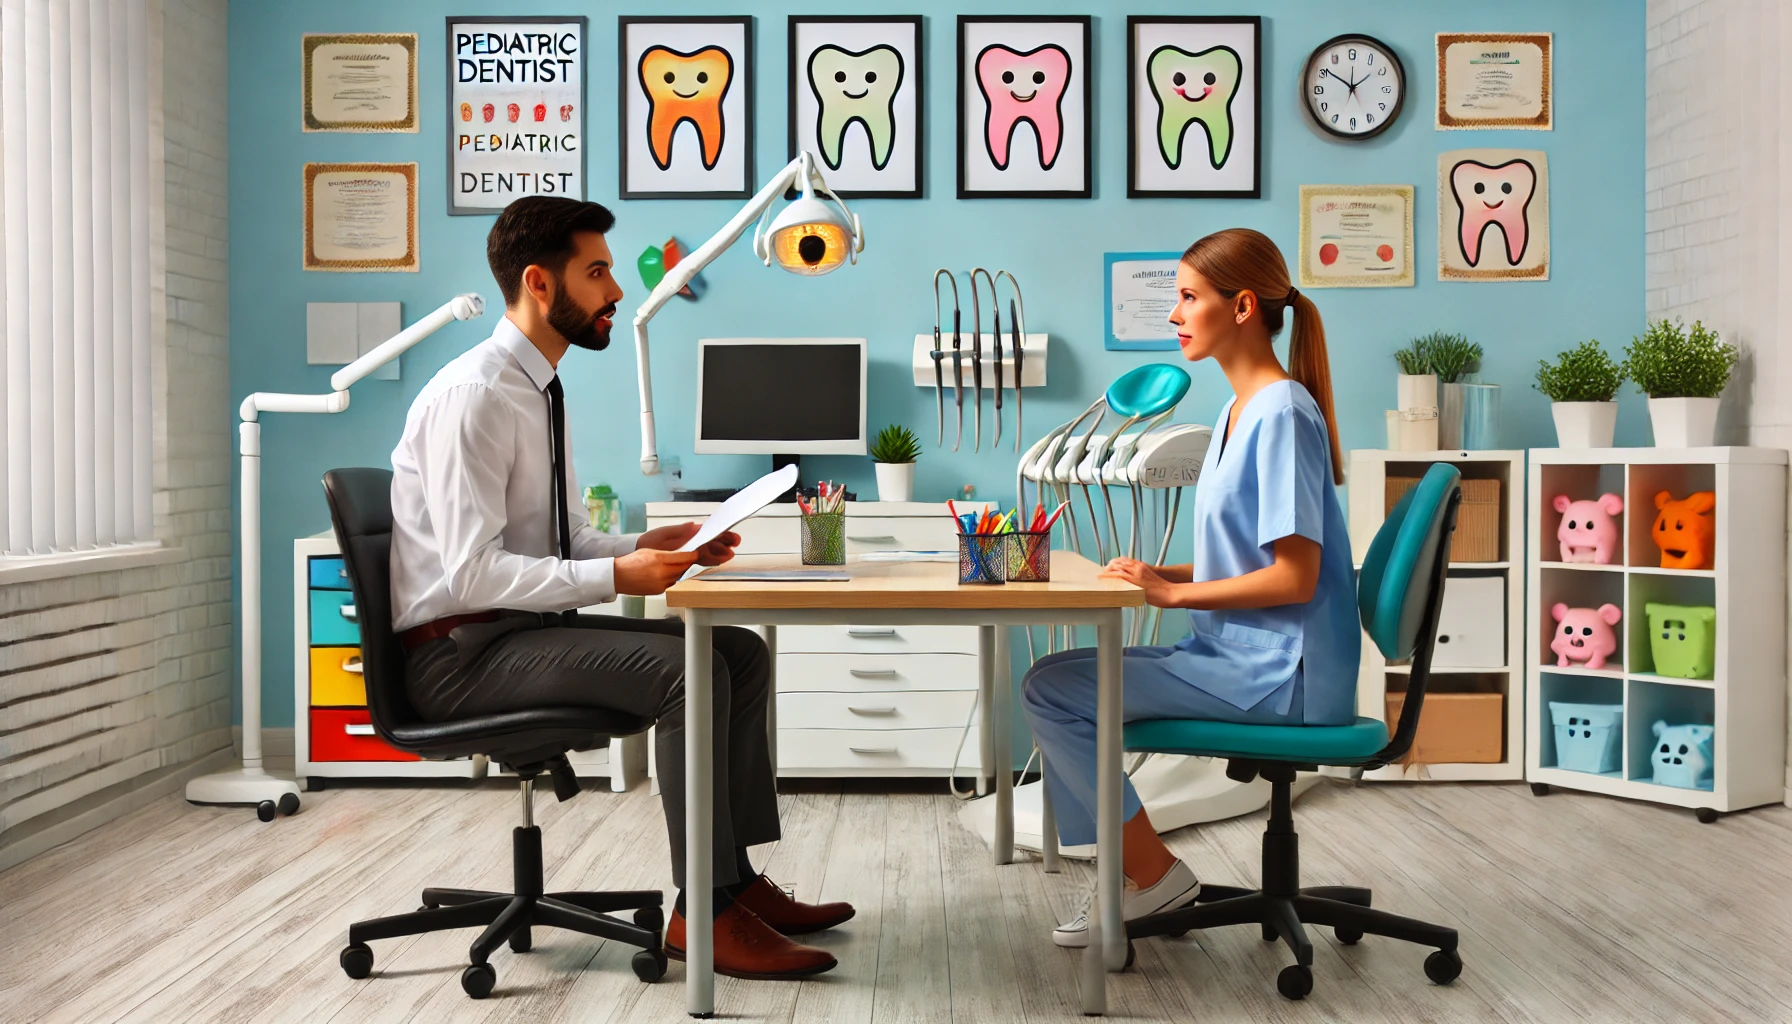 A Pediatric Dentist Interviewing a Dental Assistant in a Brightly Decorated Dental Clinic